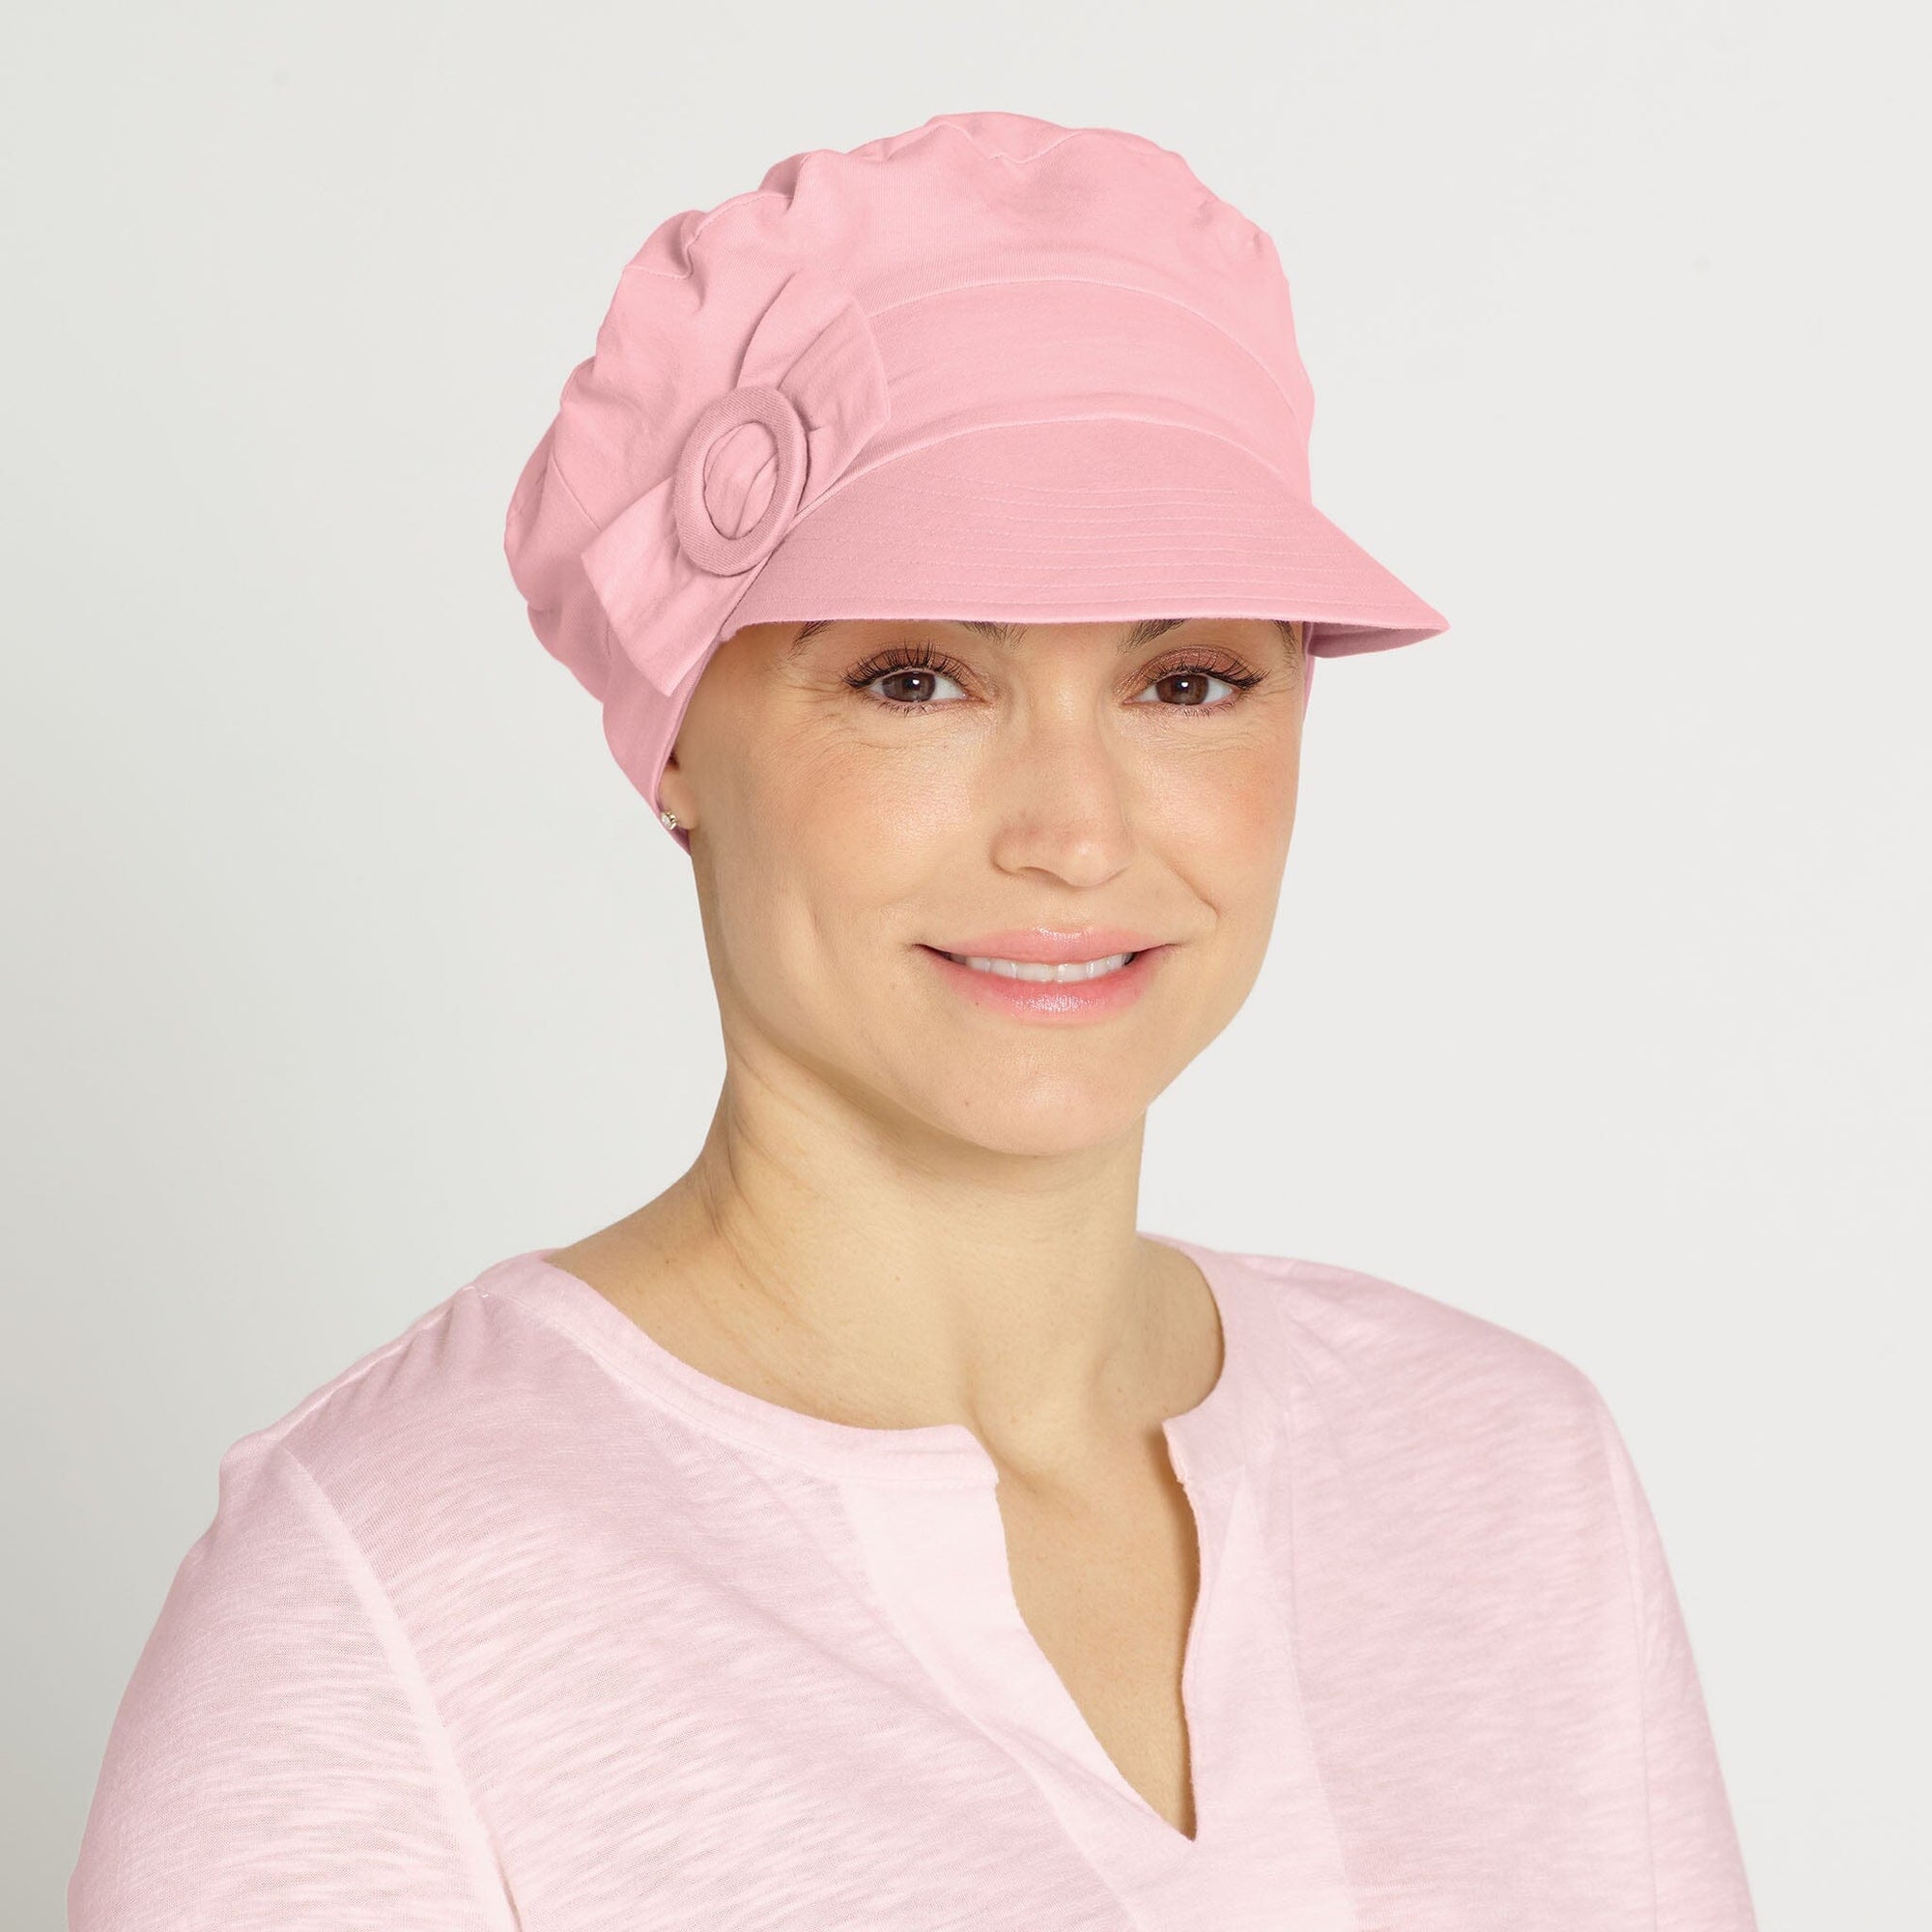 #7642 Stretchy Soft Cotton Knit Newsboy Cap shown in pink.